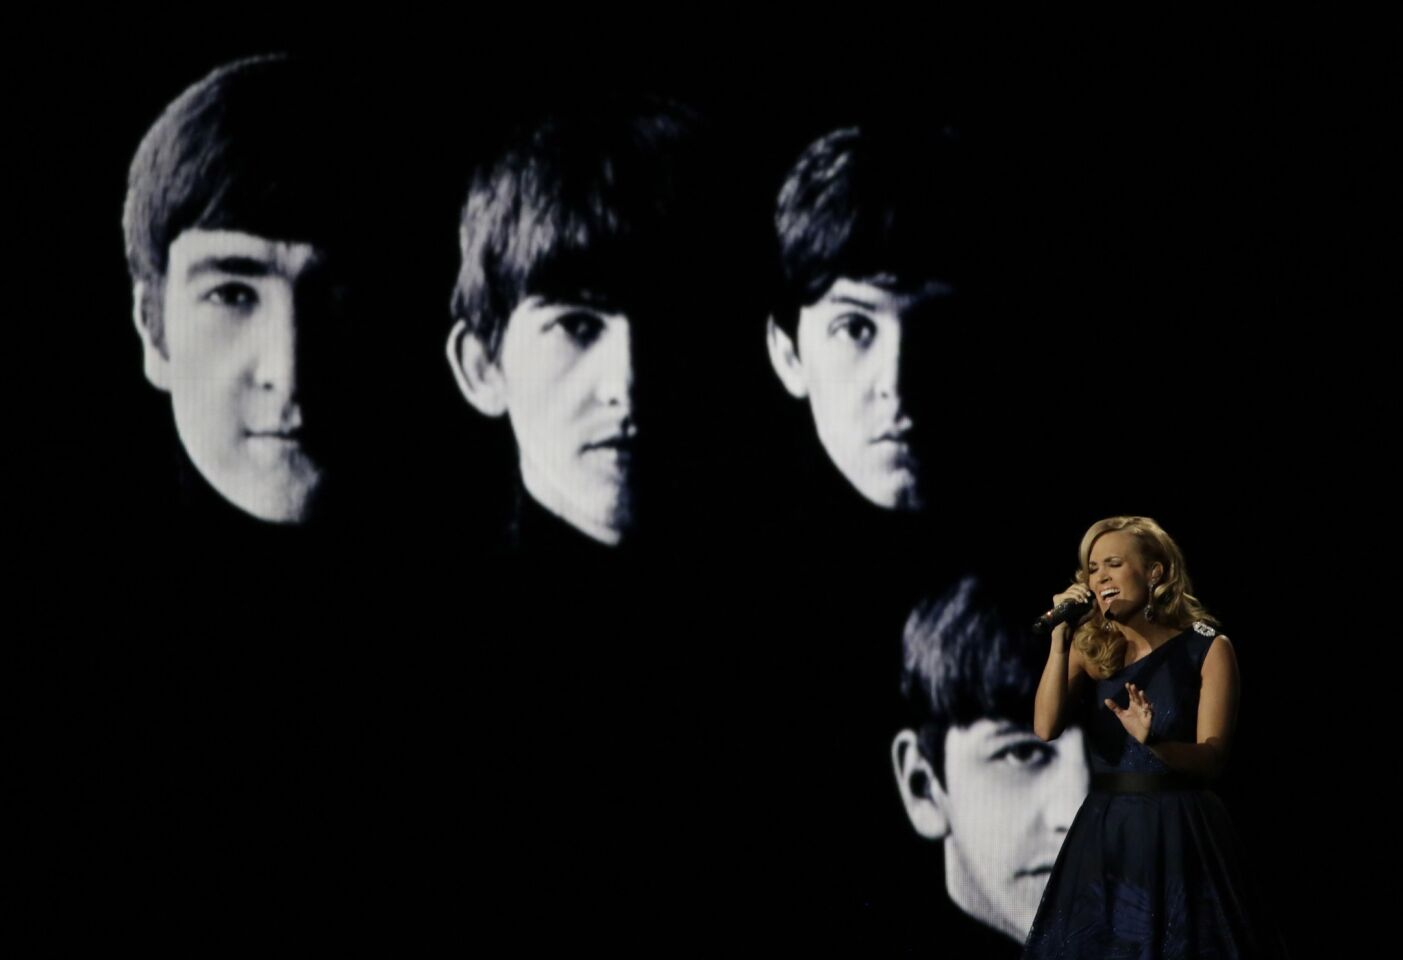 The Emmys decided to pay tribute to the 50th anniversary of 1963 this year, which included such Emmy-worthy moments as the JFK assassination. It also celebrated the 50th anniversary of the Beatles' American TV debut on "The Ed Sullivan Show," which technically happened in 1964. To pay tribute, singer Carrie Underwood performed the Beatles' hit "Yesterday," which actually didn't come out until 1965.